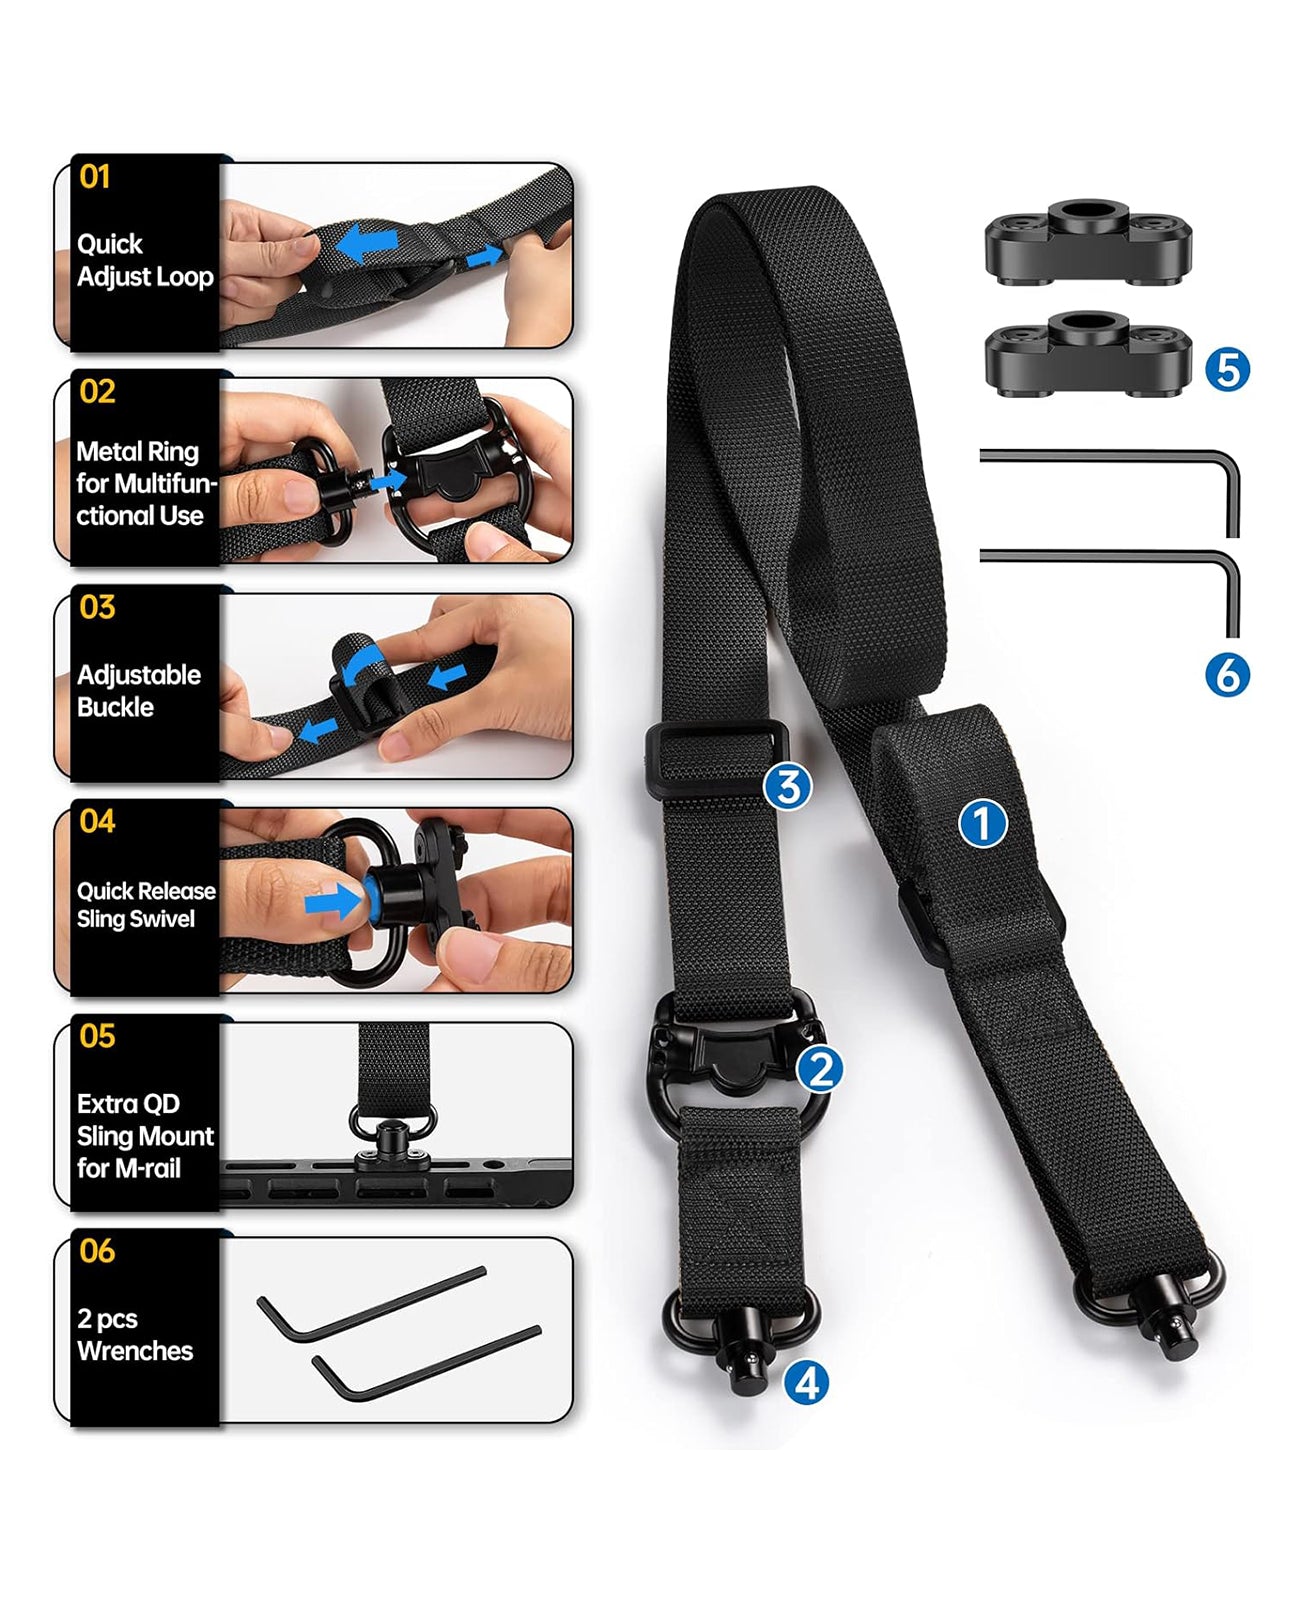 2 Point Rifle Sling with Swivels Installation Instruction